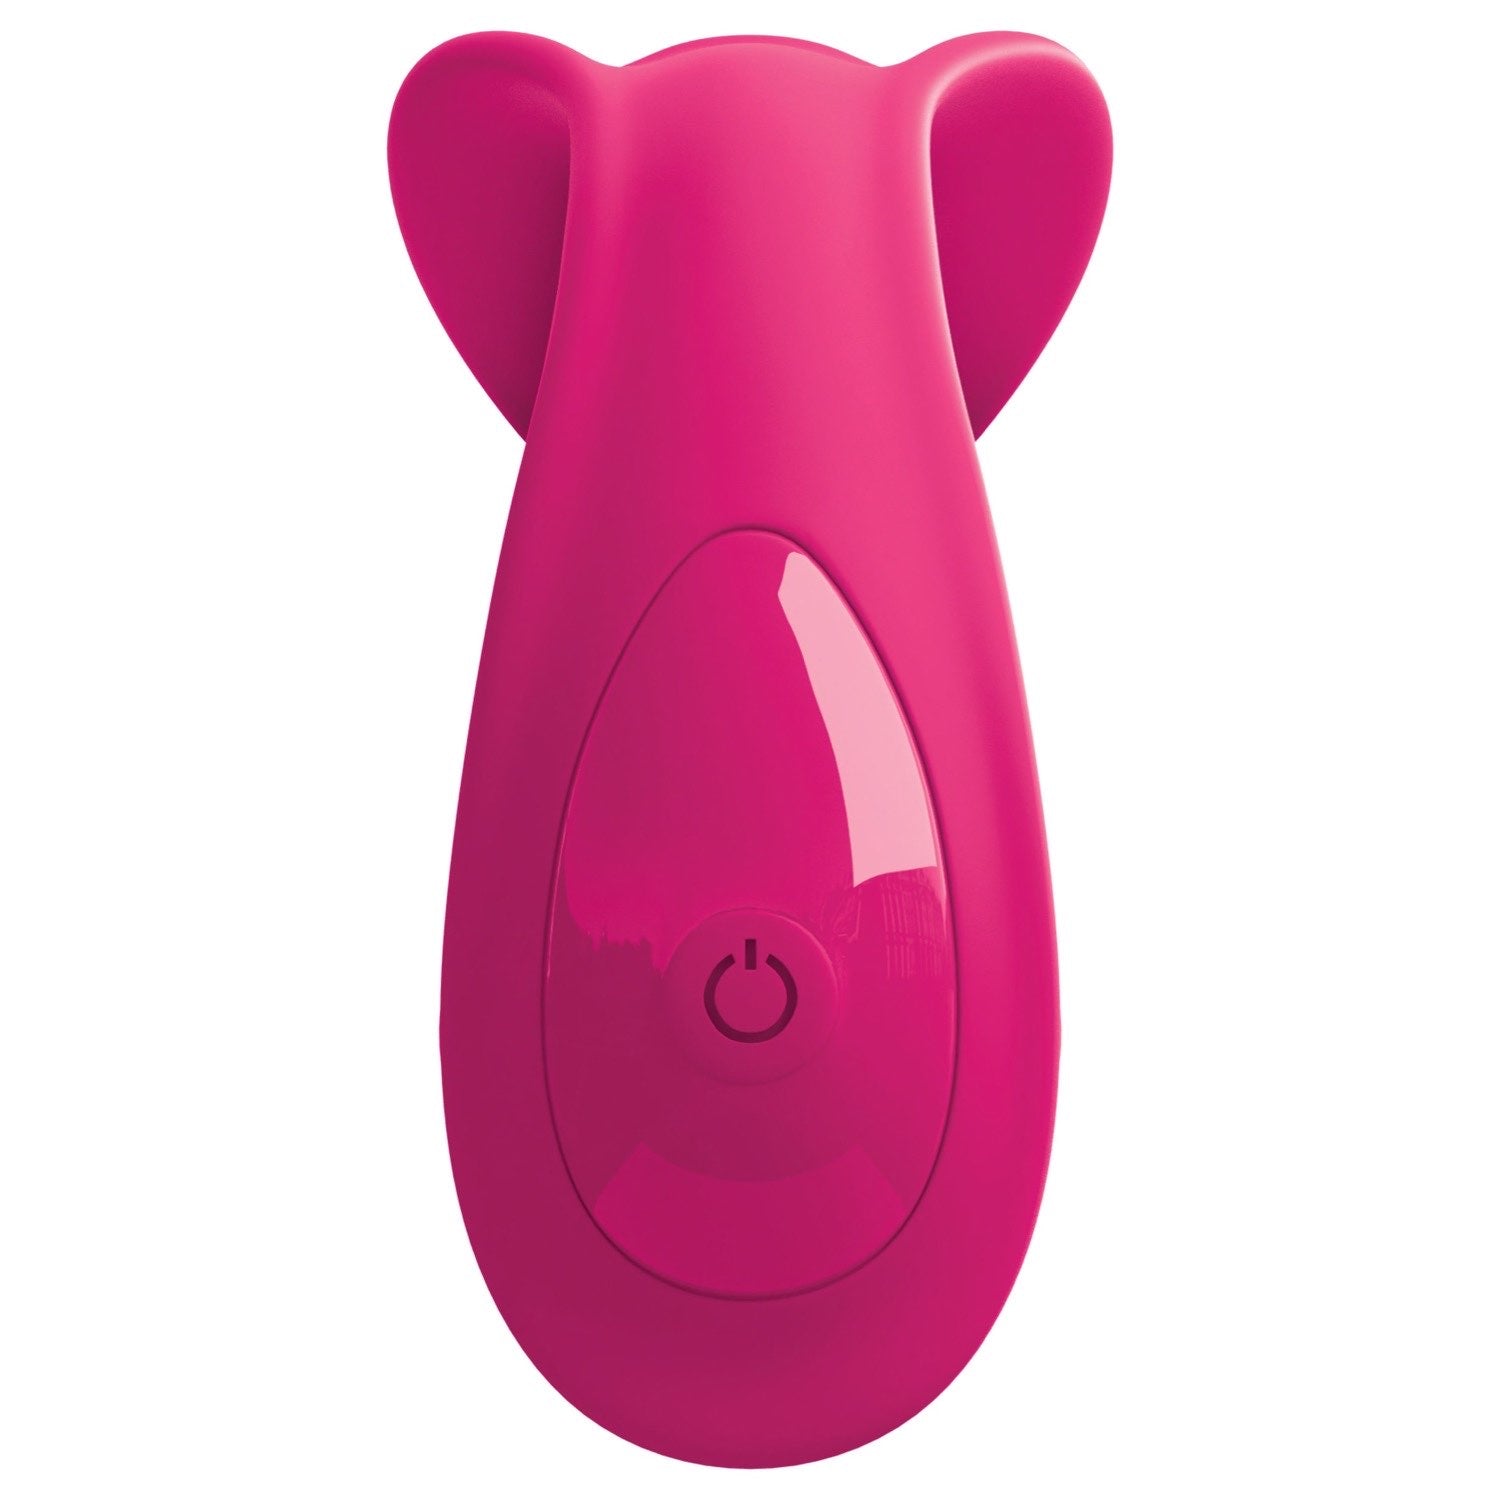 3Some Double Ecstasy - Pink USB Rechargeable Stimulator with Wireless Remote by Pipedream